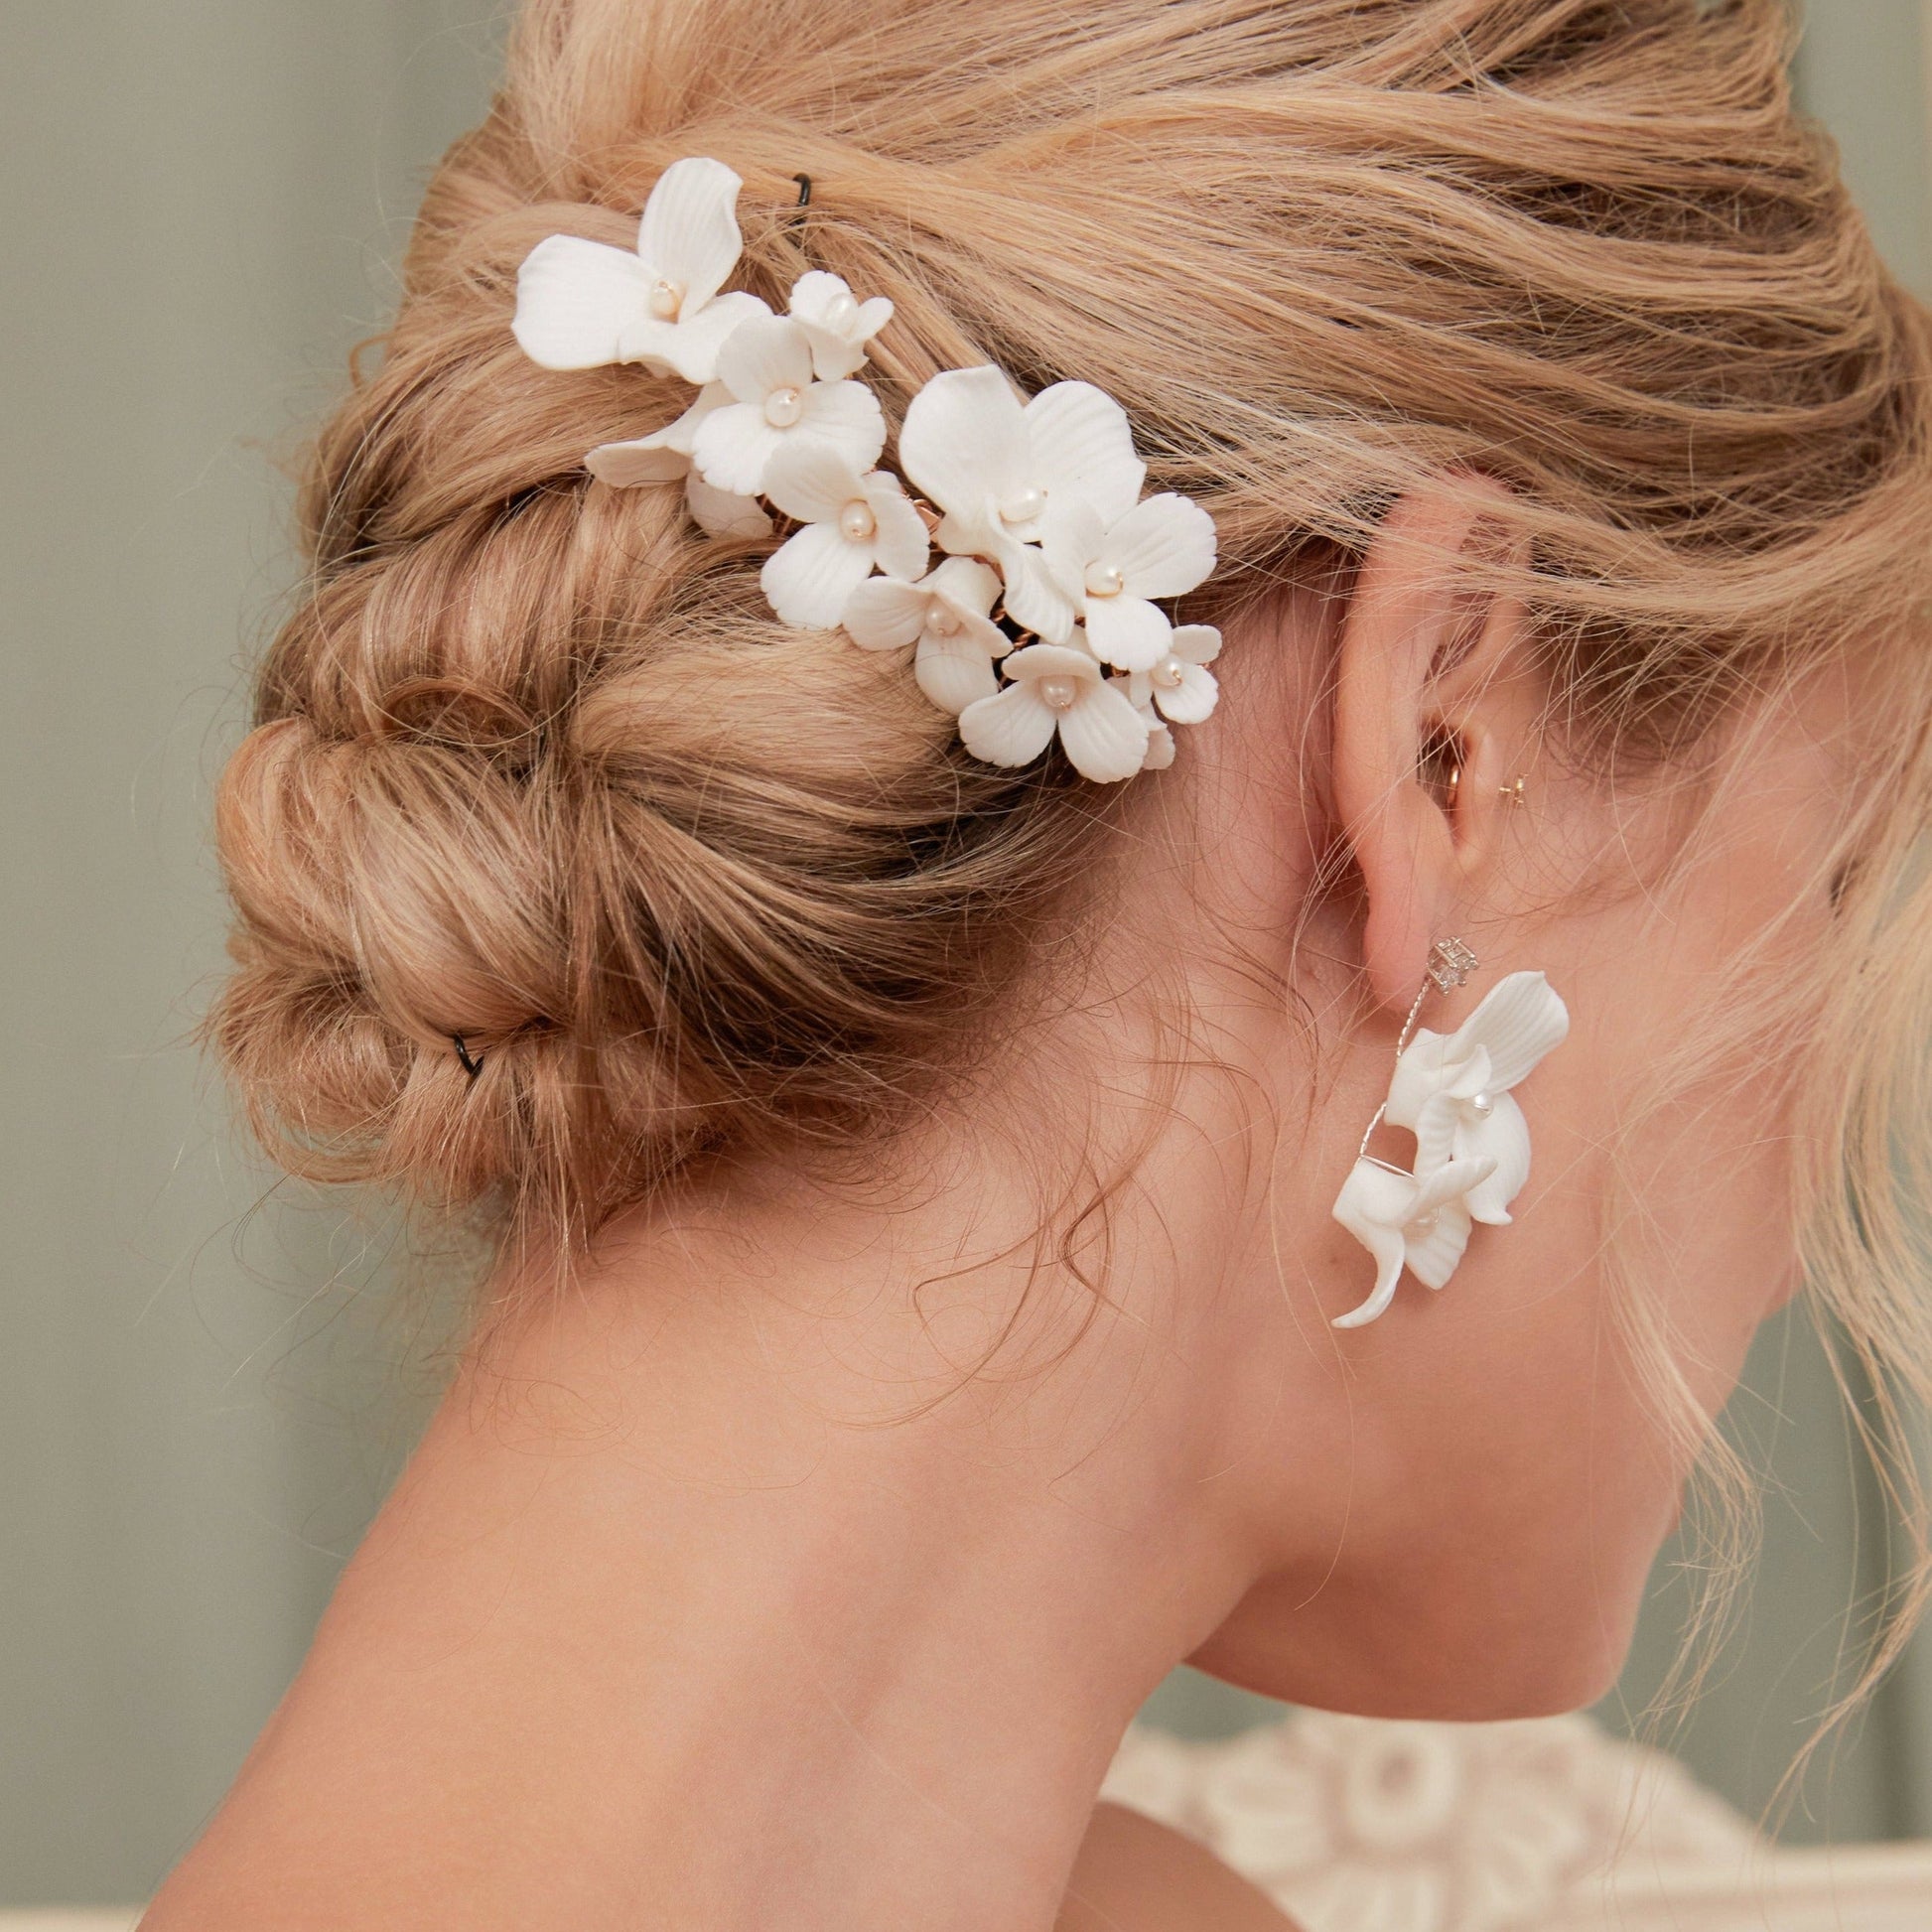 A delicate and romantic white porcelain bridal hair comb, handcrafted with love. This exquisite bridal hairpiece features a cluster of beautiful flowers adorned with lustrous natural freshwater pearls, arranged in a full design.